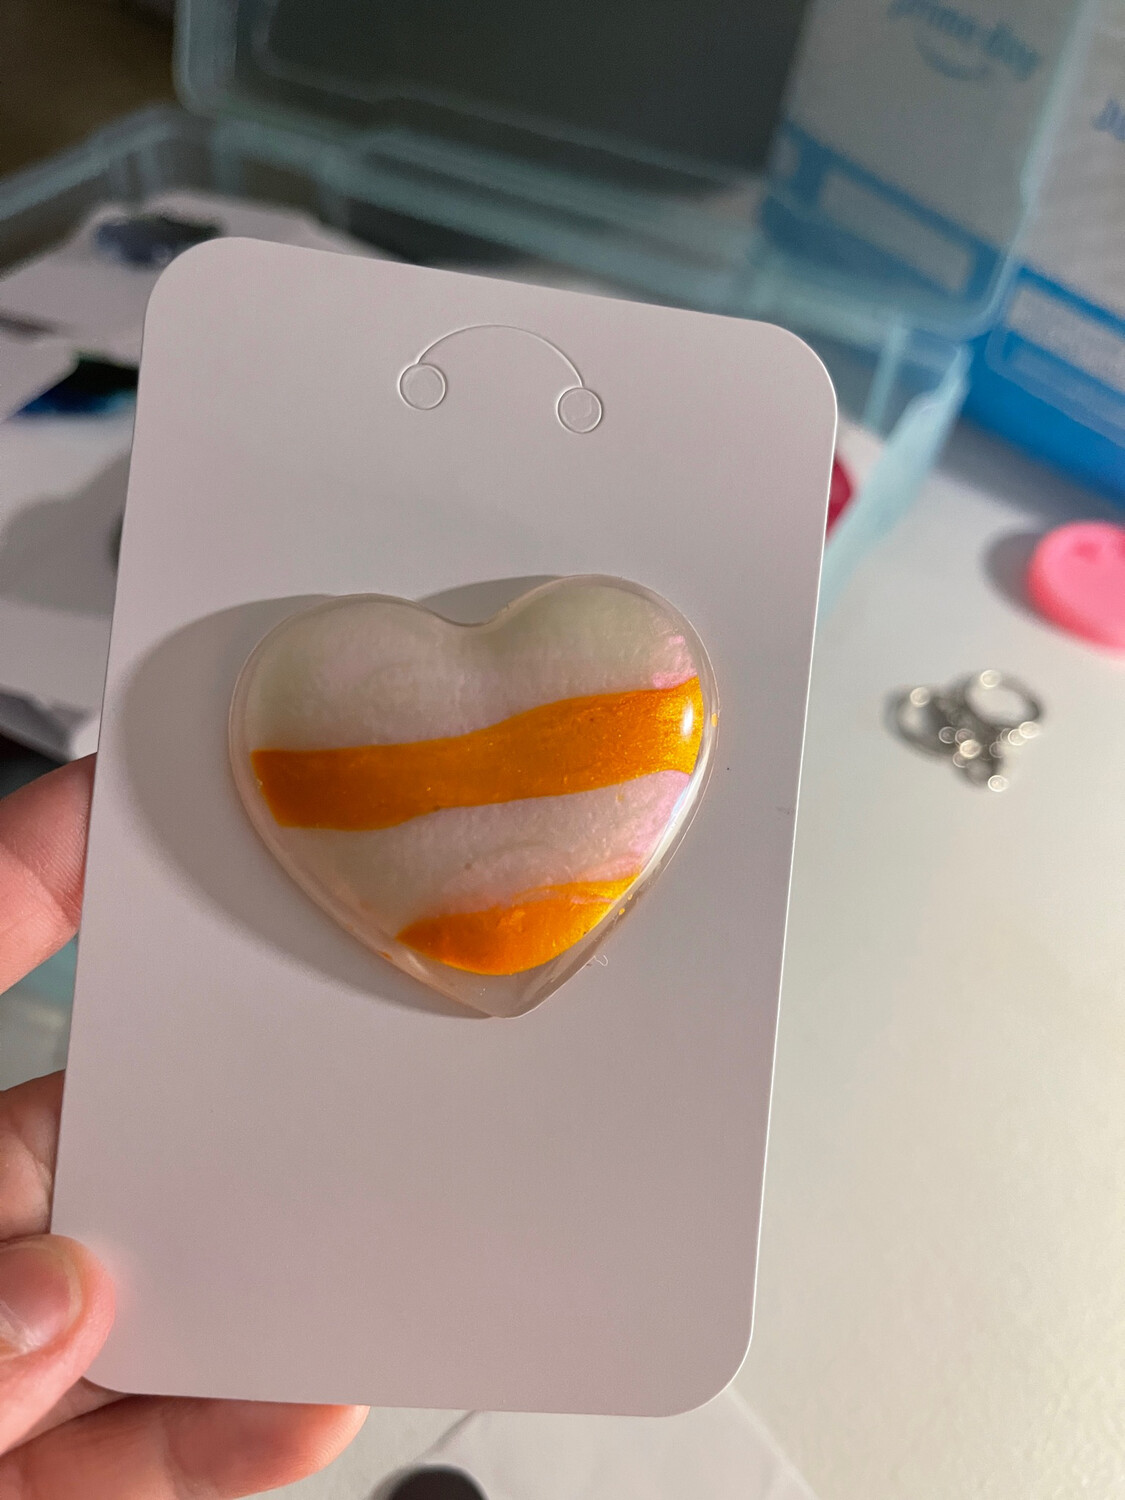 Heart Magnets - Resin - Orange and White Mica Powder